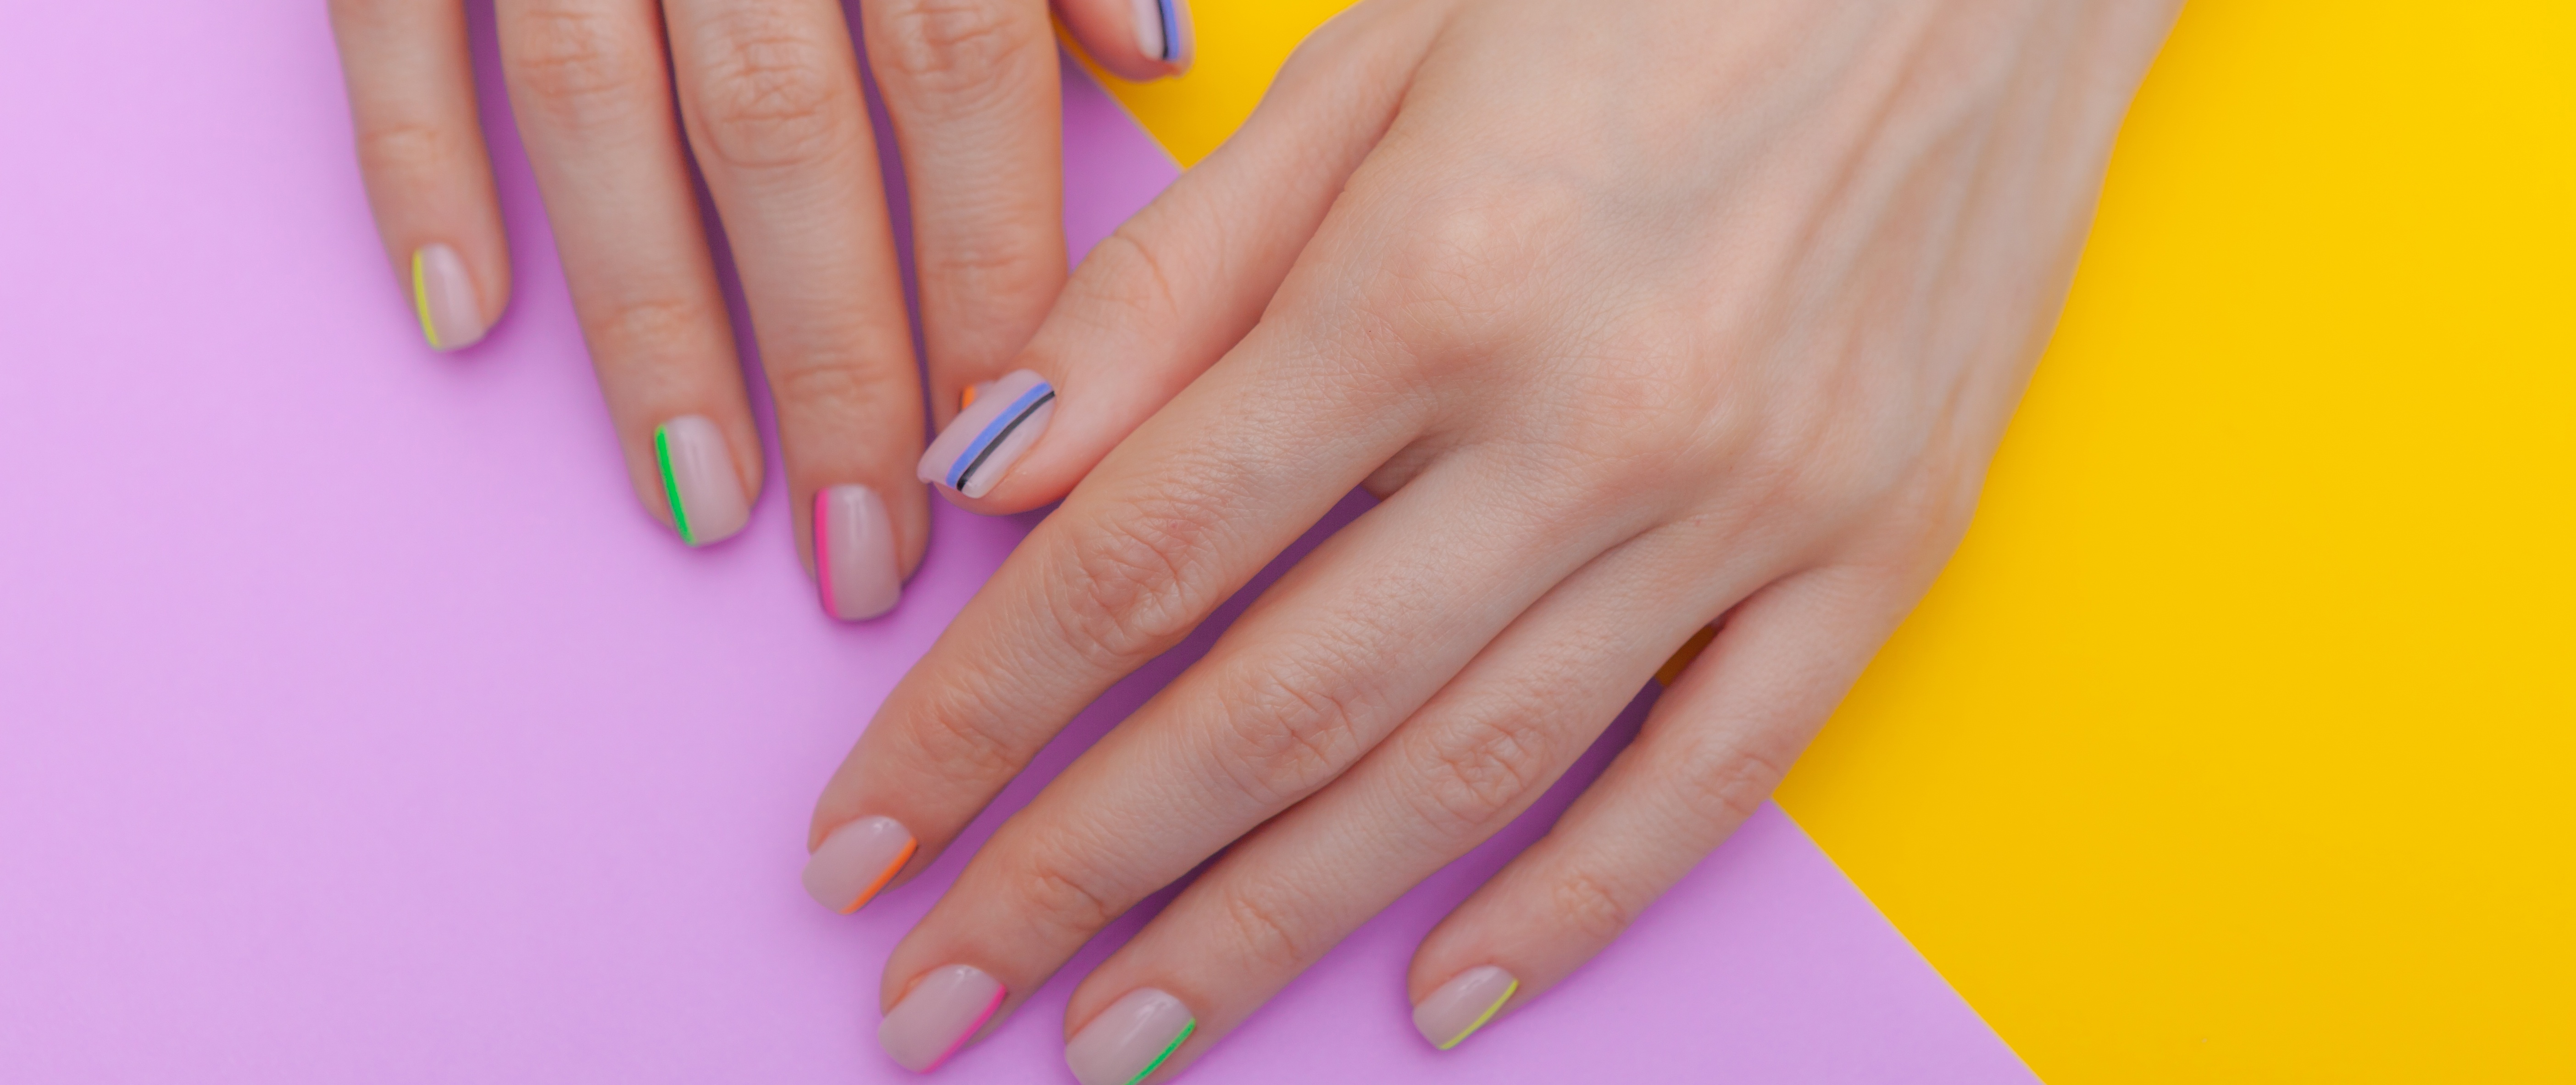 Best Nail Art Salons NYC: Creative Manicures & Nail Designs